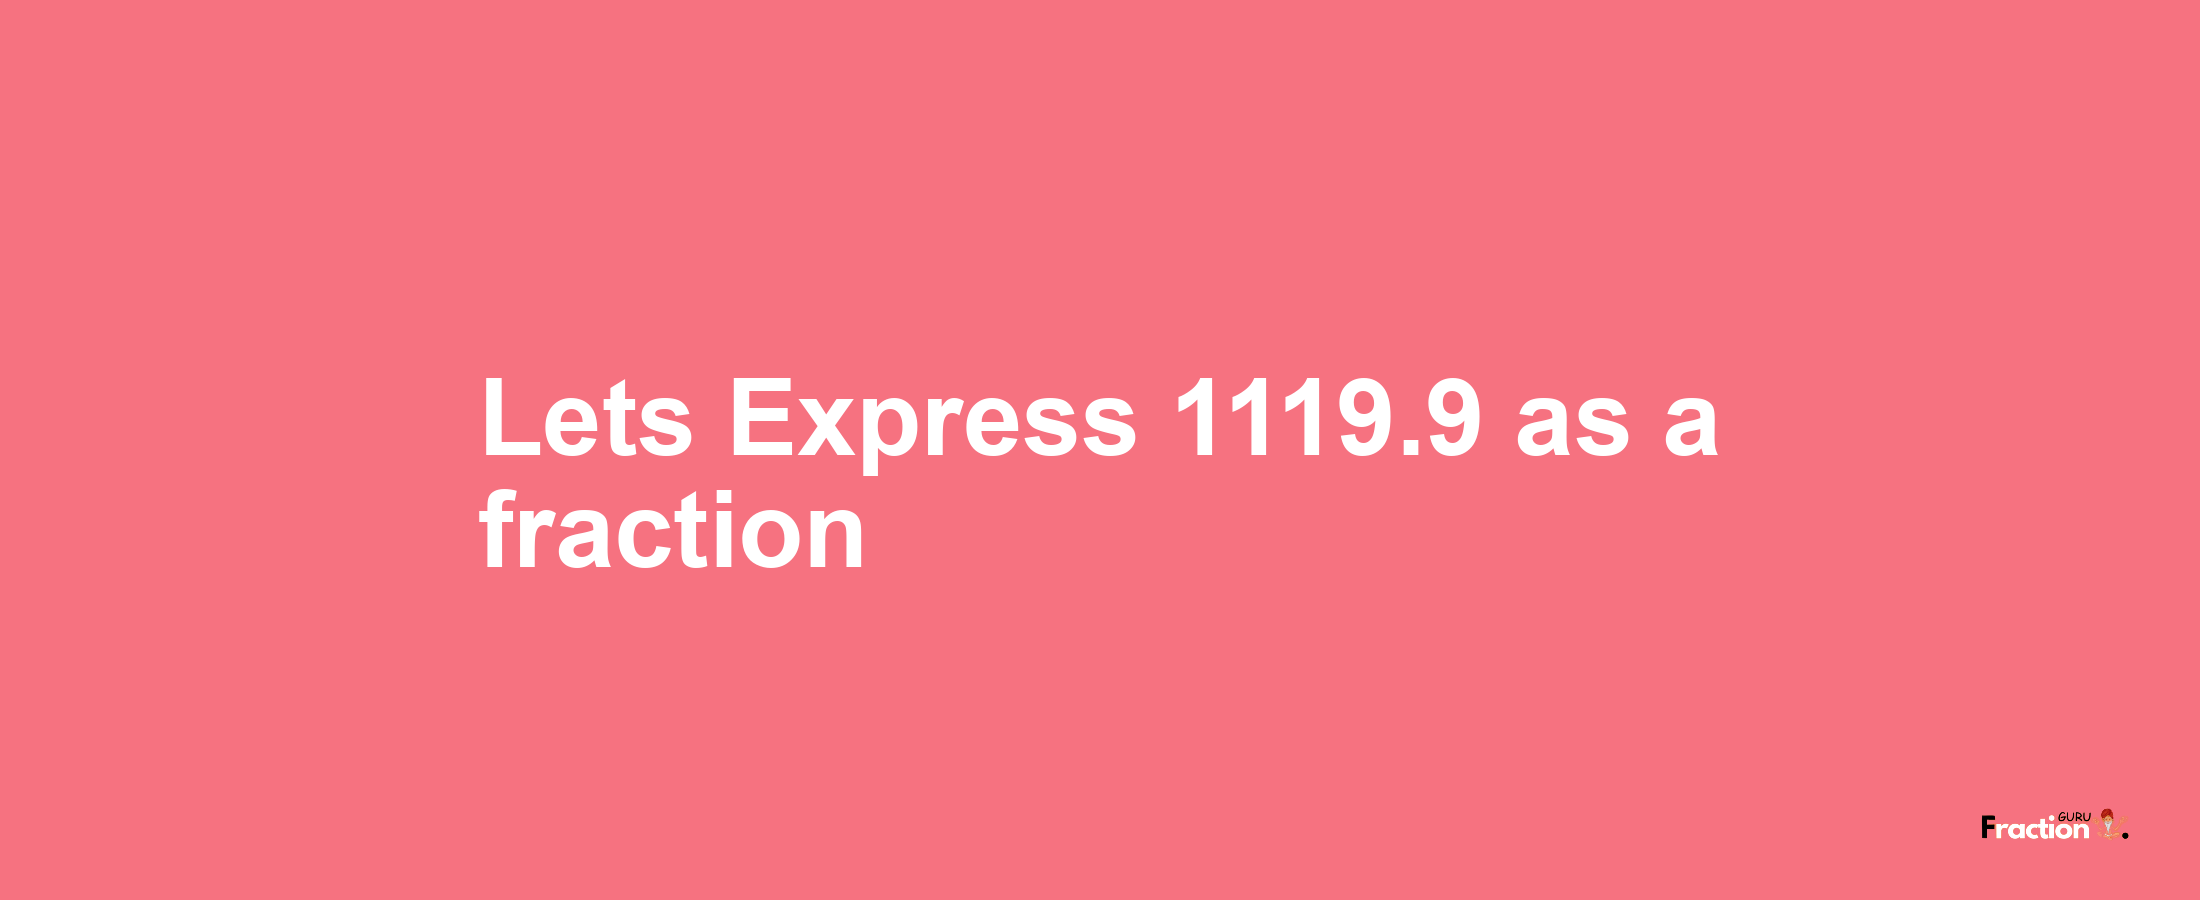 Lets Express 1119.9 as afraction